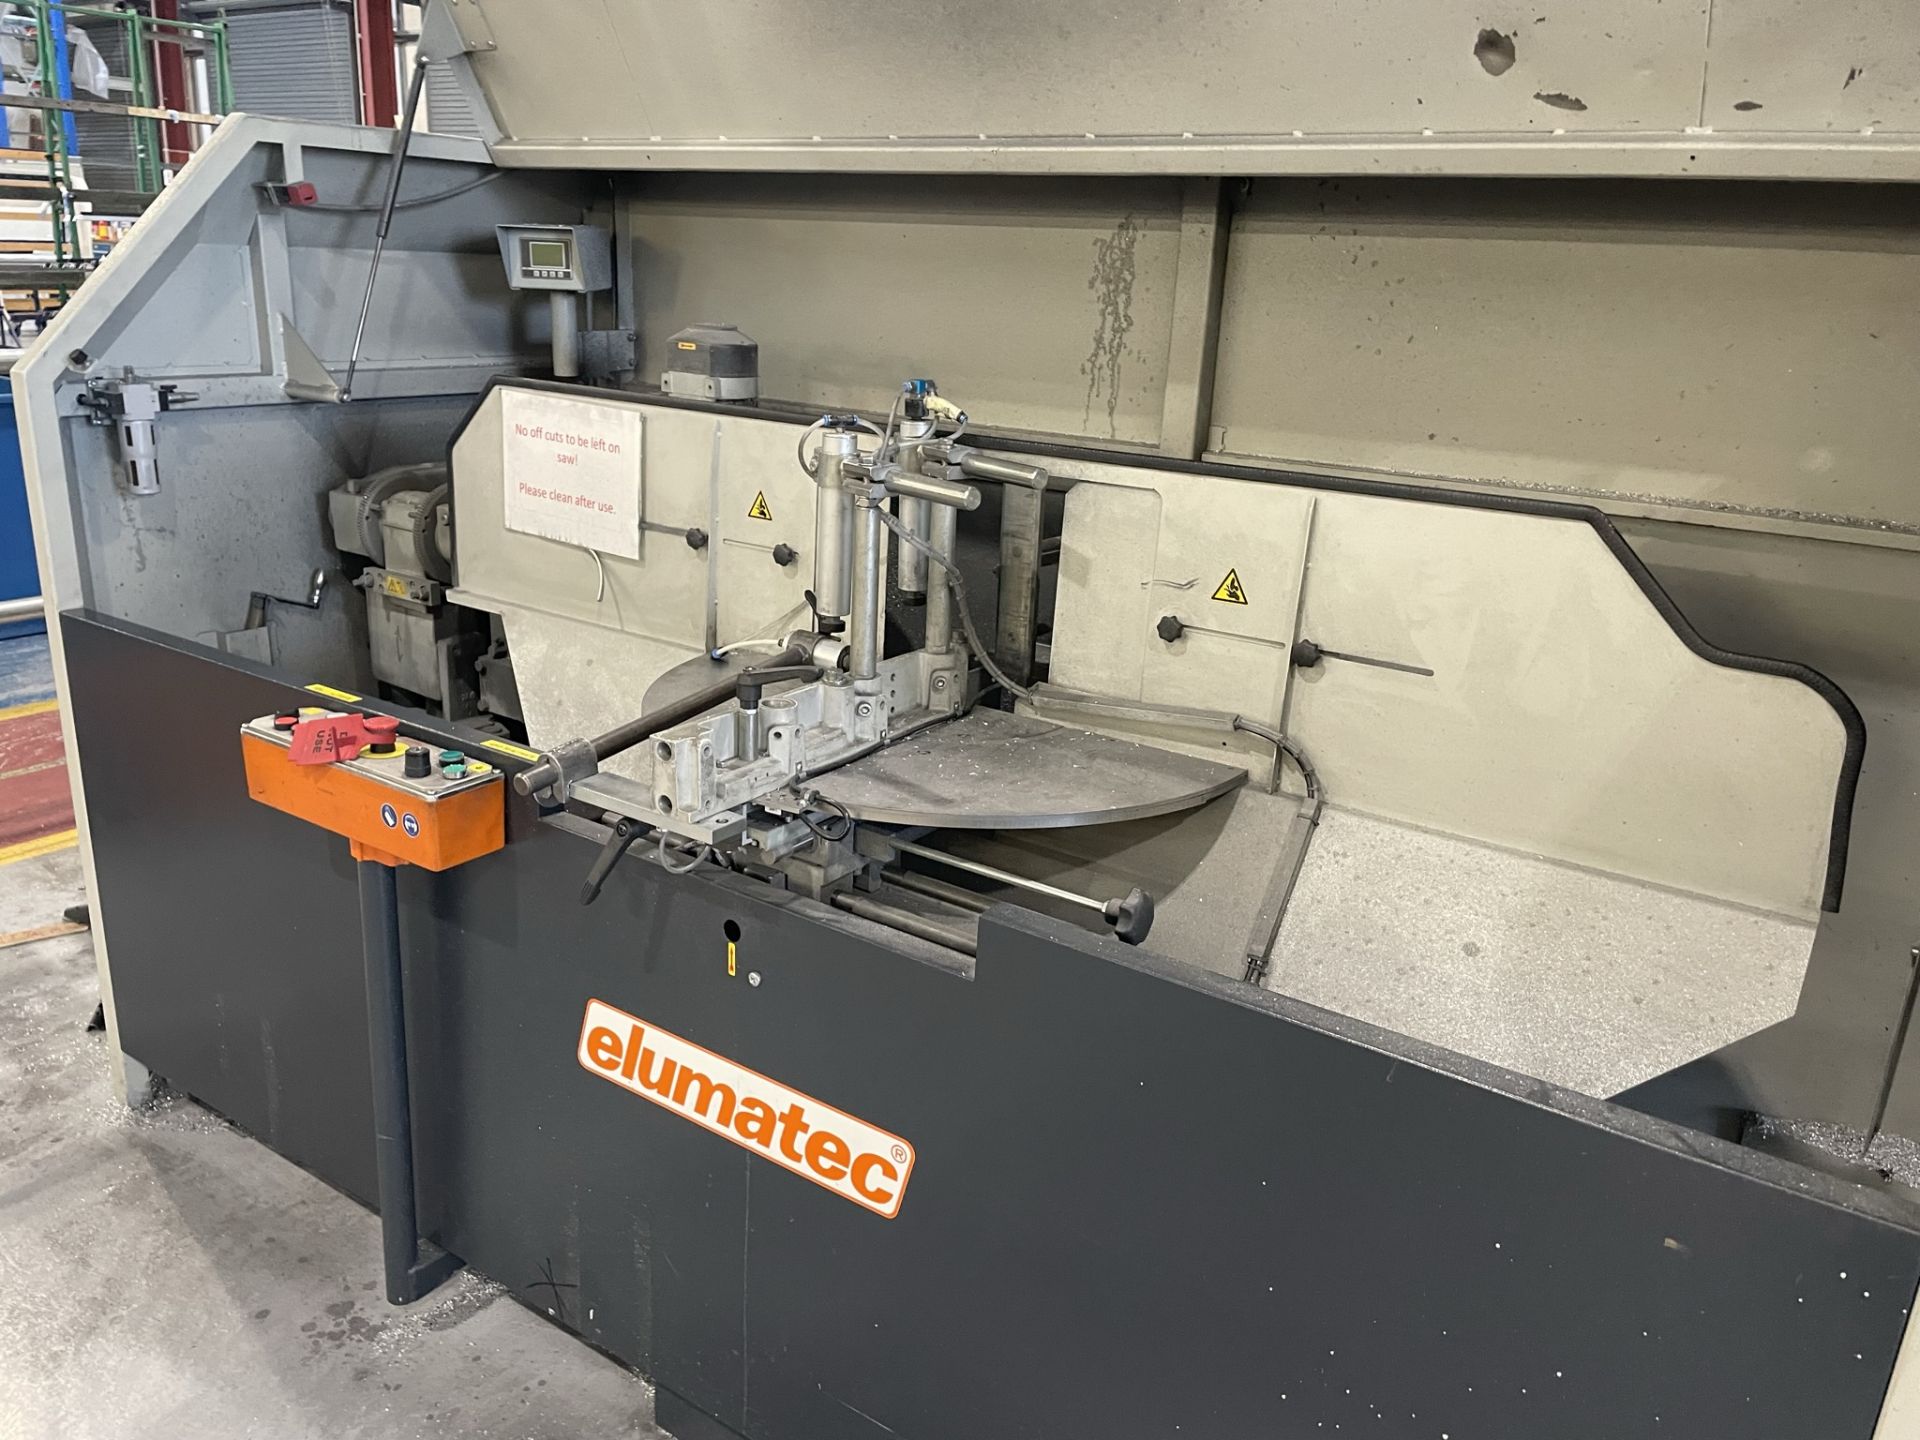 Elumatec, AKS134/00 end milling and notching saw, Serial No. 1340020790 (DOM: 2012) and 2x (no.) - Image 6 of 8